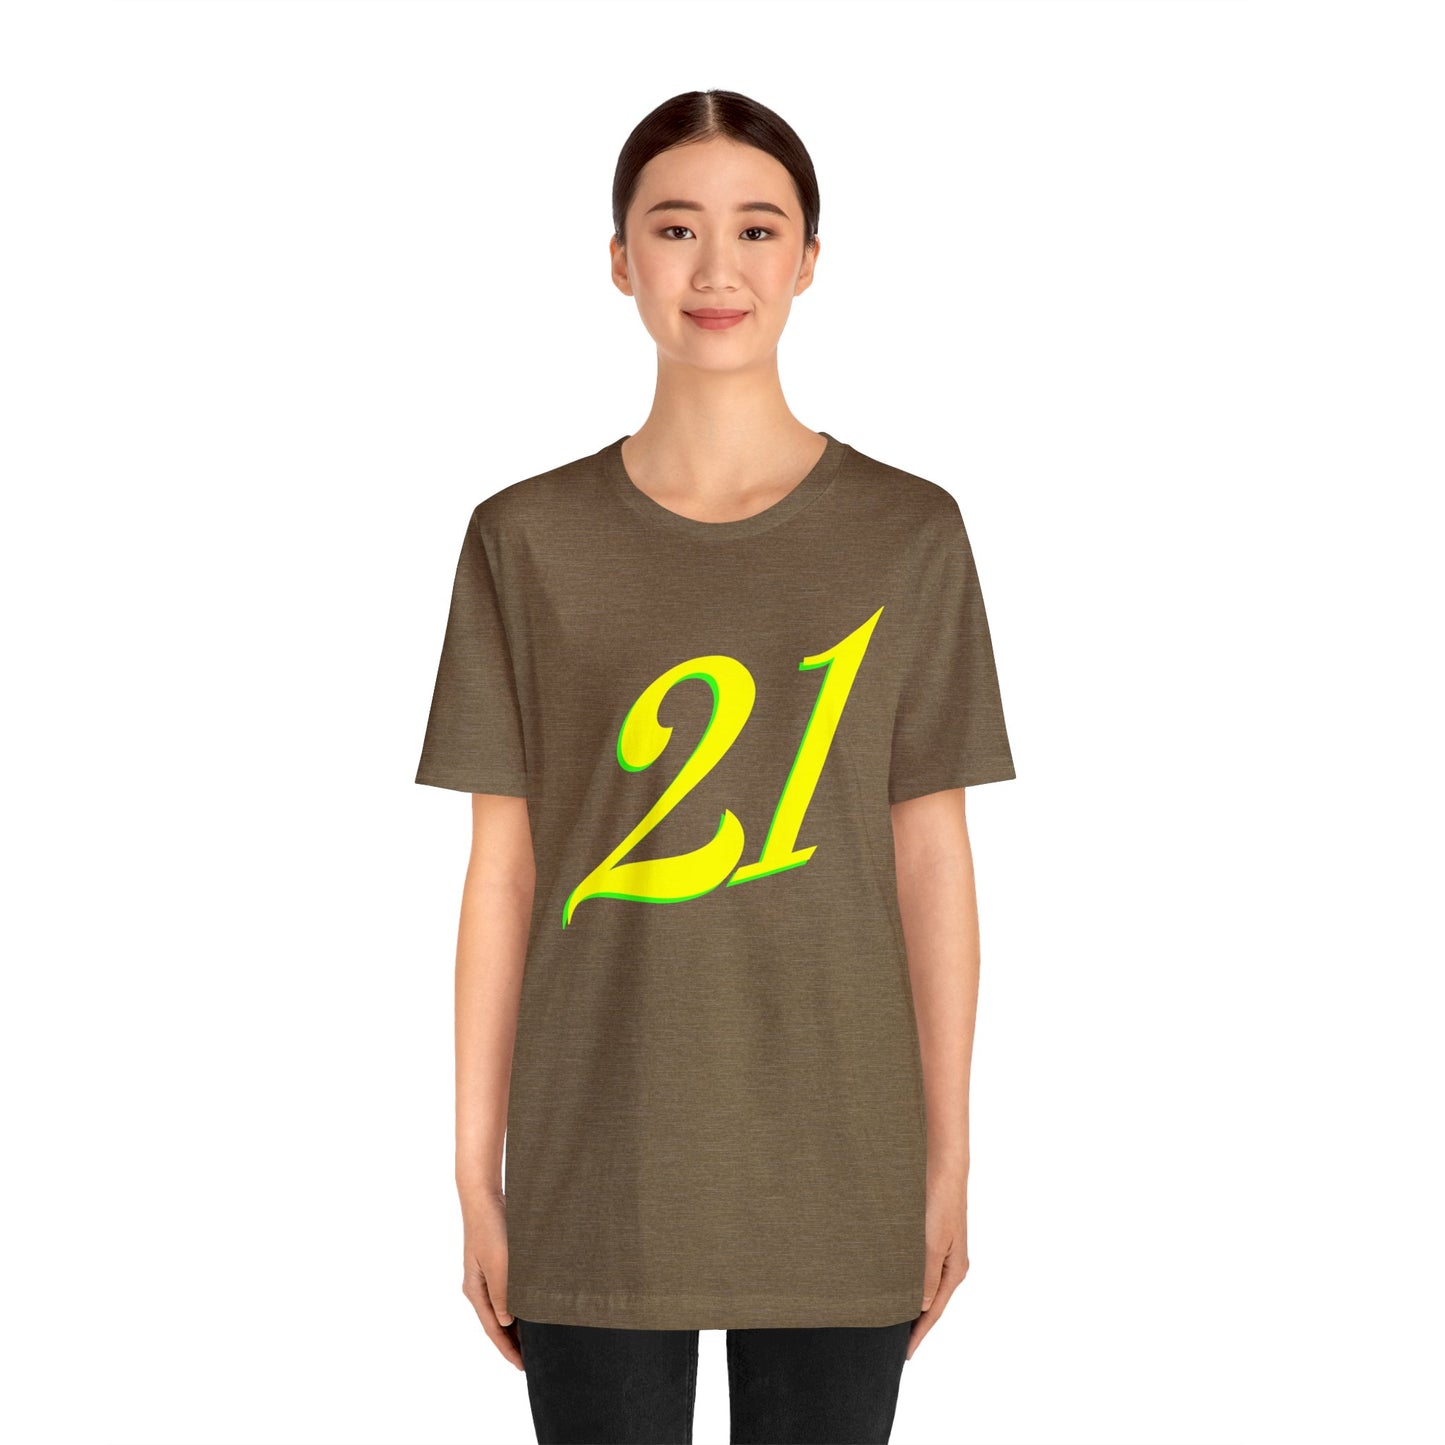 Number 21 Design - Soft Cotton Tee for birthdays and celebrations, Gift for friends and family, Multiple Options by clothezy.com in Dark Grey Heather Size Medium - Buy Now